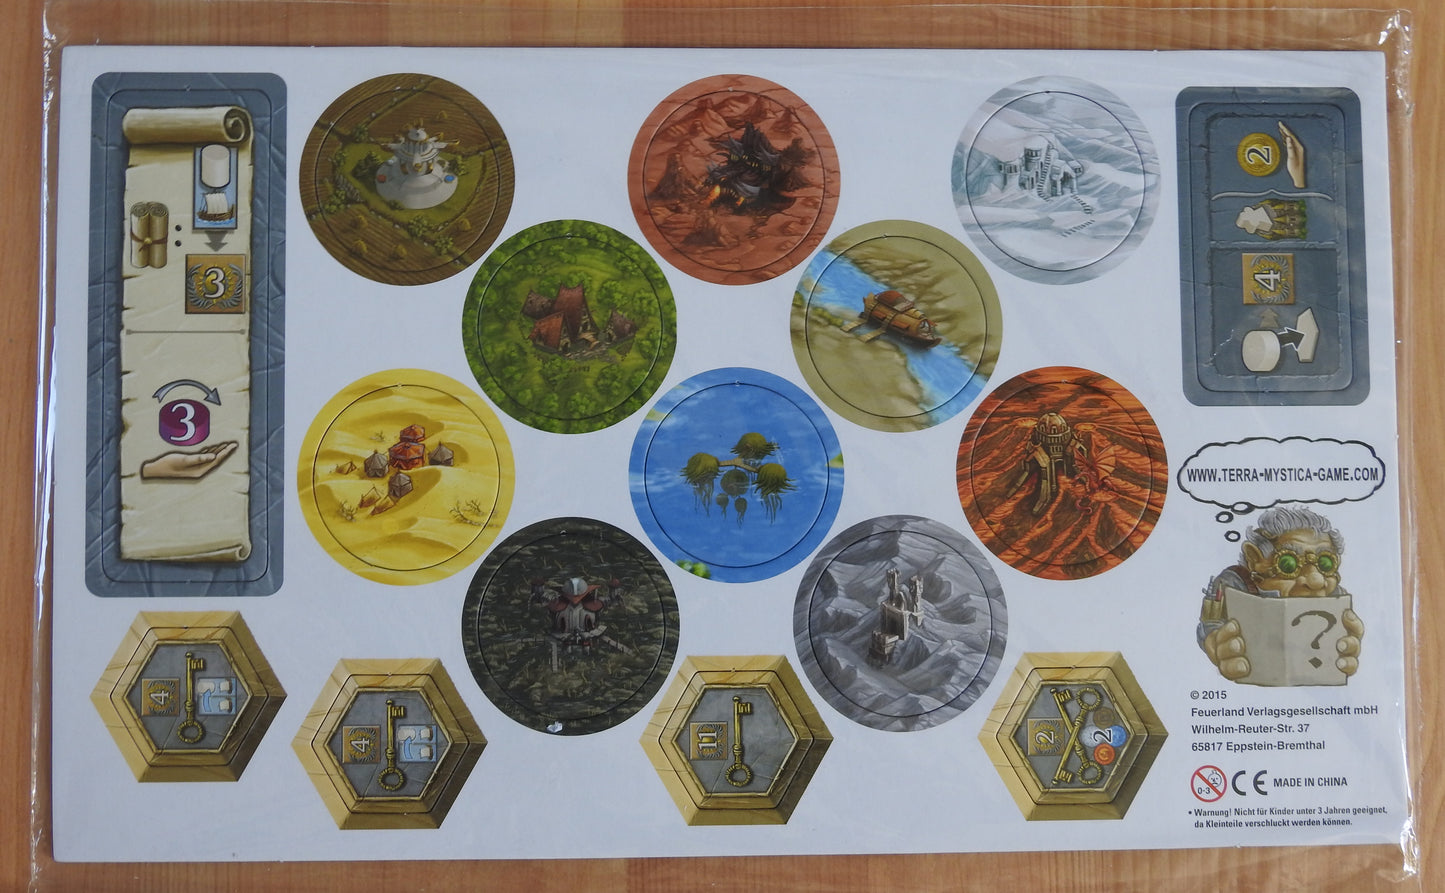 The tiles and tokens included with this Terra Mystica mini expansion 4 promo bundle.